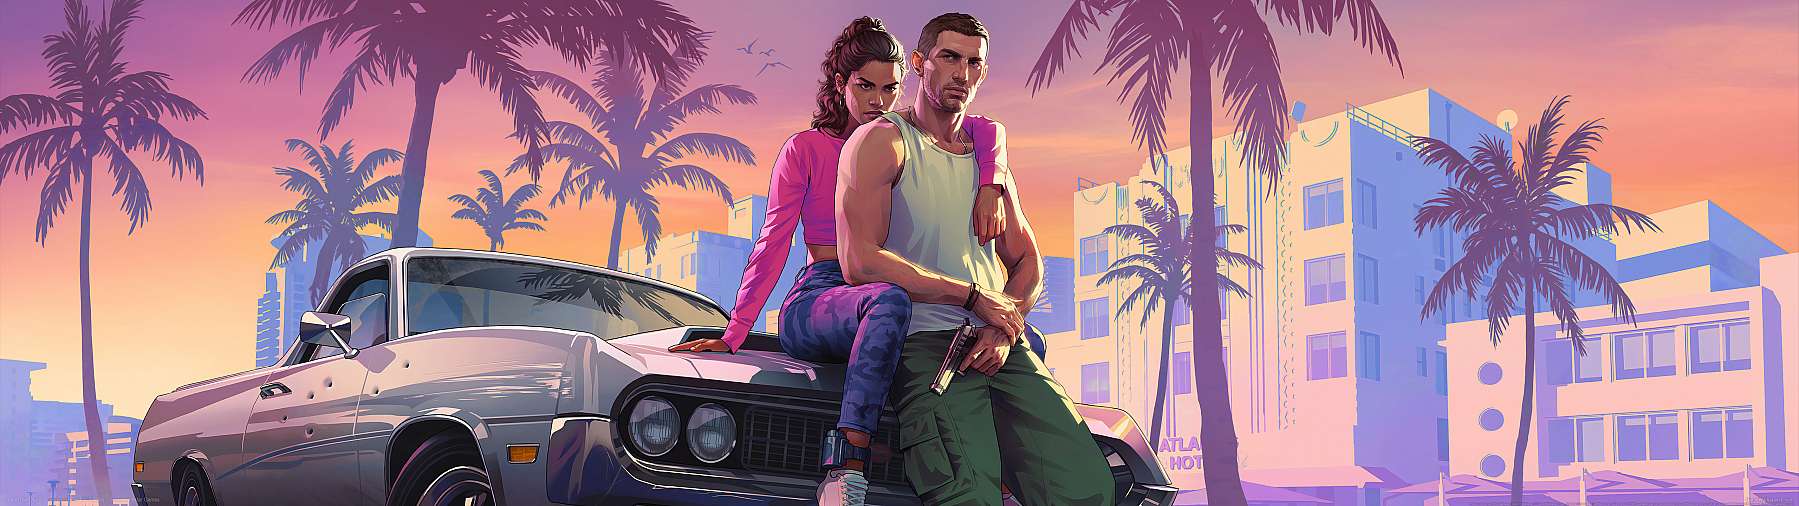 Grand Theft Auto 6 wallpaper or background